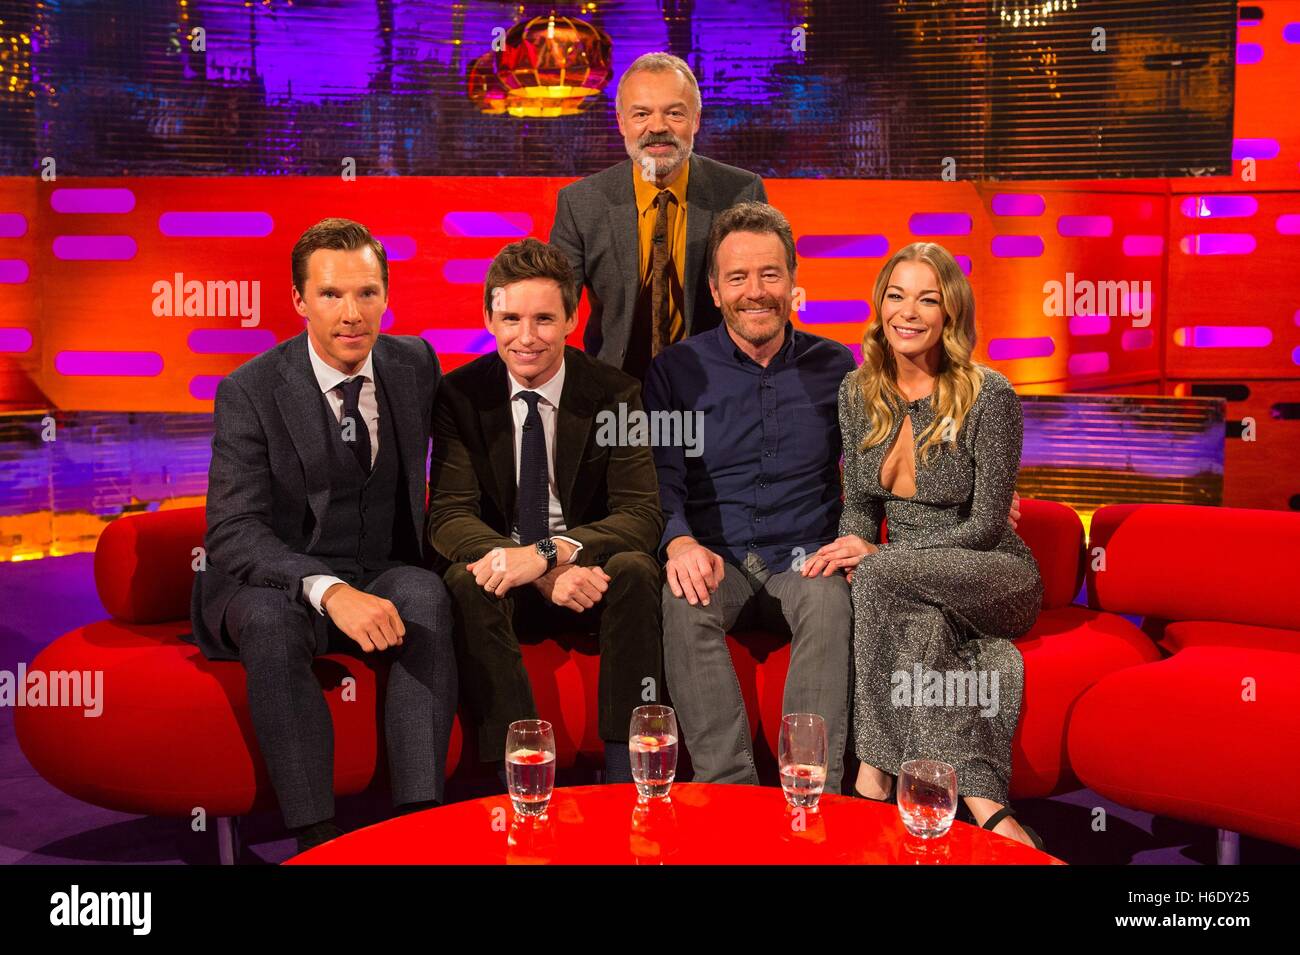 (left to right) Benedict Cumberbatch, Eddie Redmayne, Graham Norton, Bryan Cranston and LeAnn Rimes during filming of the Graham Norton Show at The London Studios, south London, to be aired on BBC One on Friday evening. Stock Photo